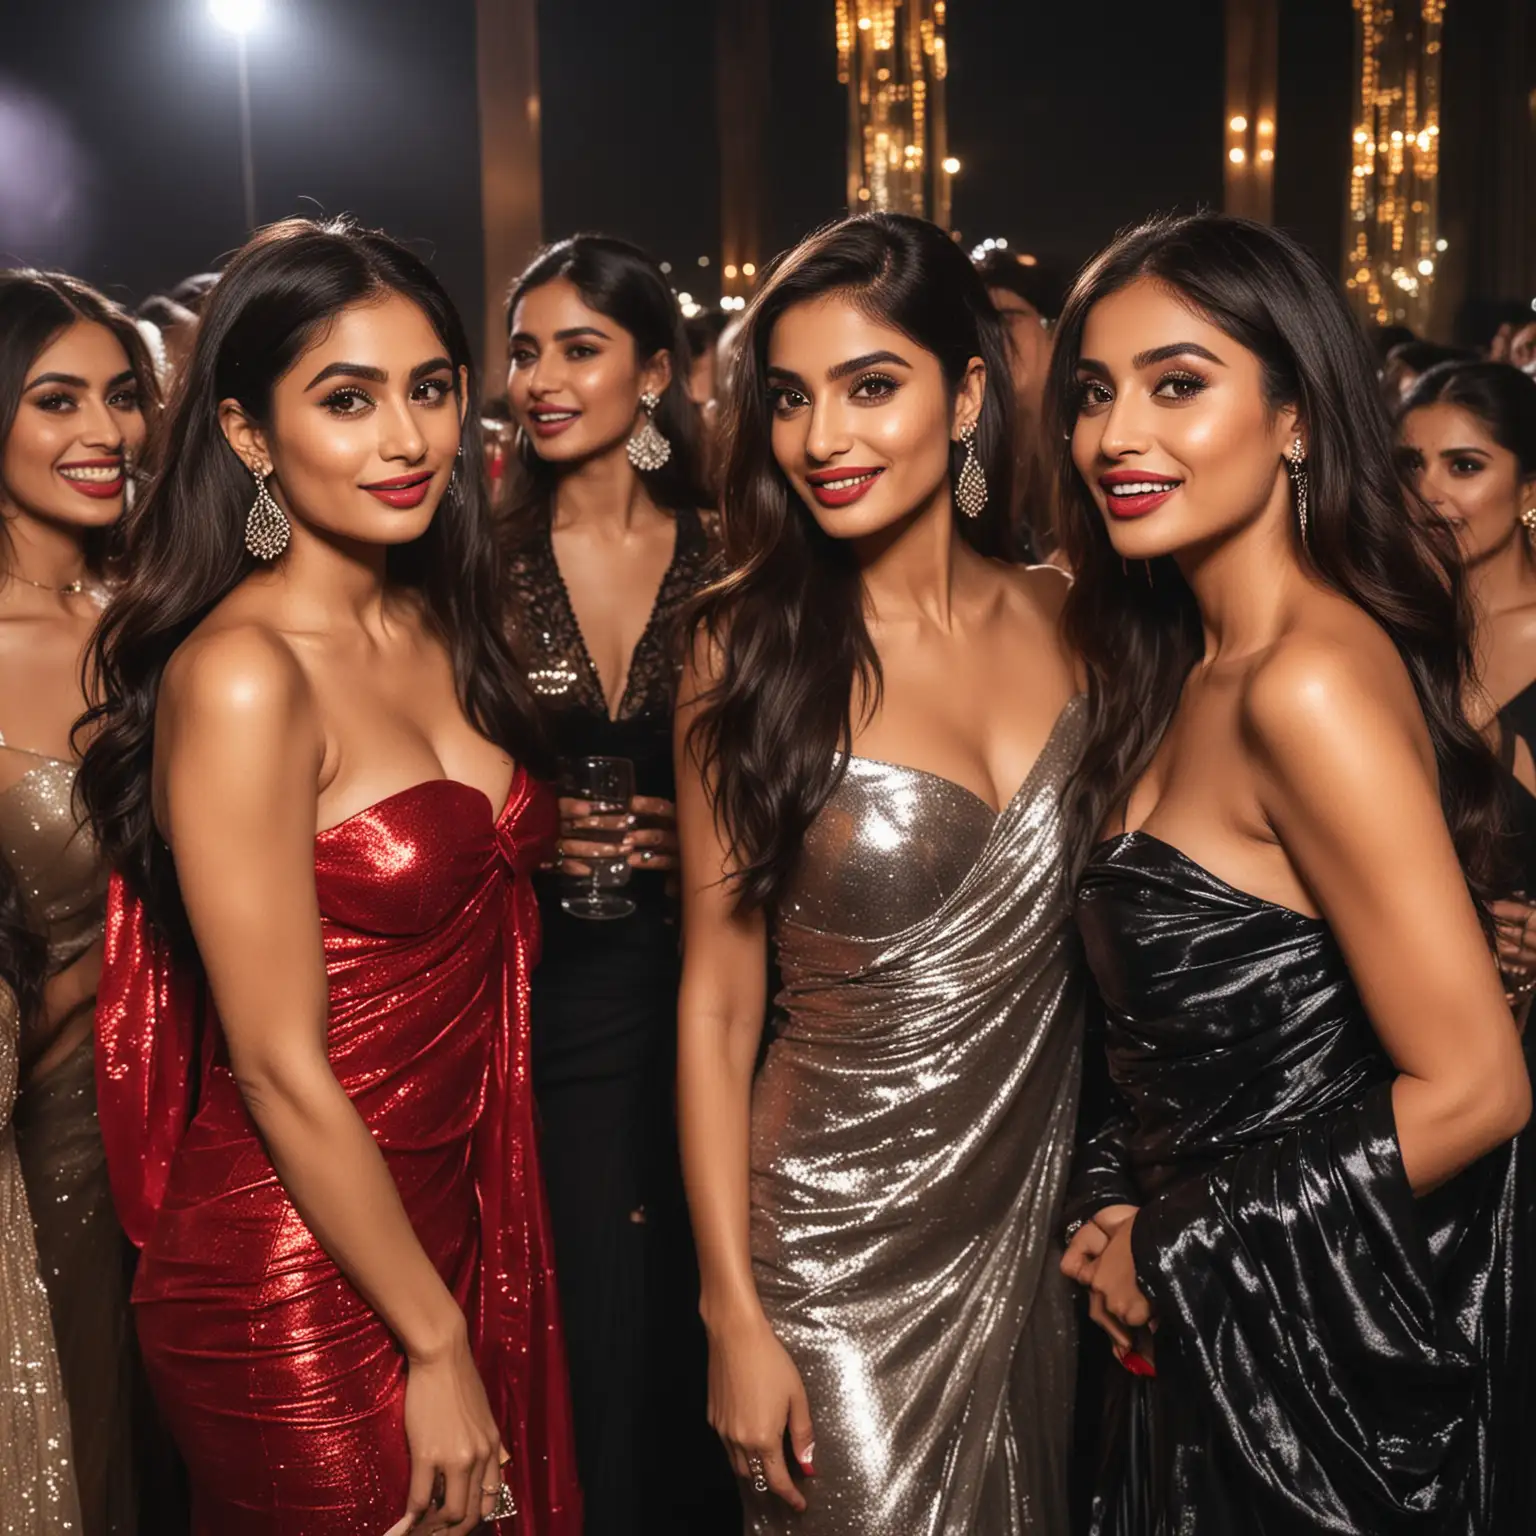 Flash photography, ISO-100 f/32 Hasselblad camera shot. VIP area of a posh Dubai nightblub. Decadent party in progress. Mouni Roy & Disha Patani partying wearing shiny glossy liquid metallic sheer sarees, red glossy lipstick & lots of makeup. Her bold slutty friends make out with her romantically